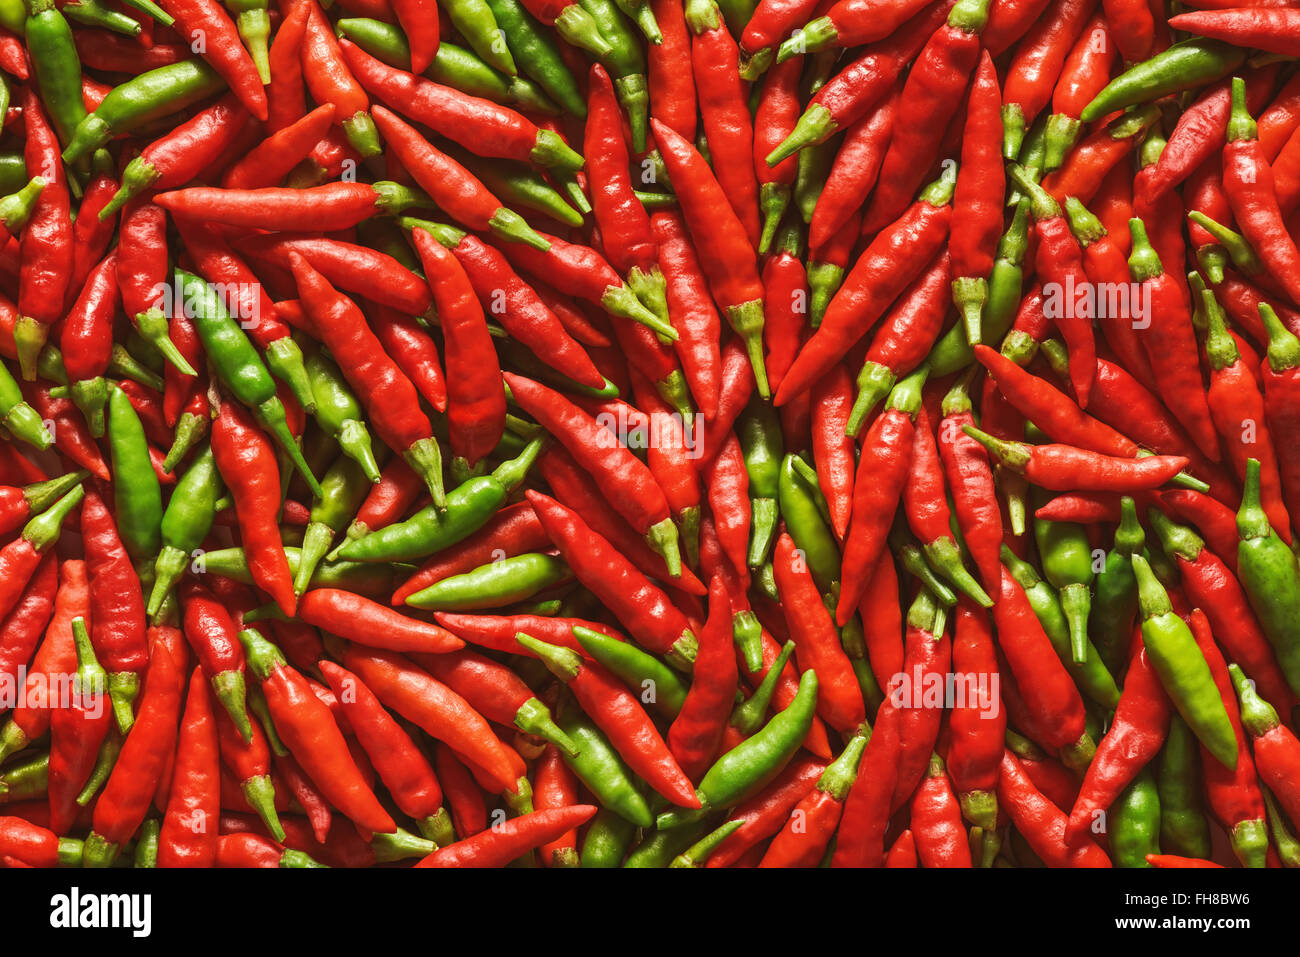 Red and green pepper over flat surface. Stock Photo